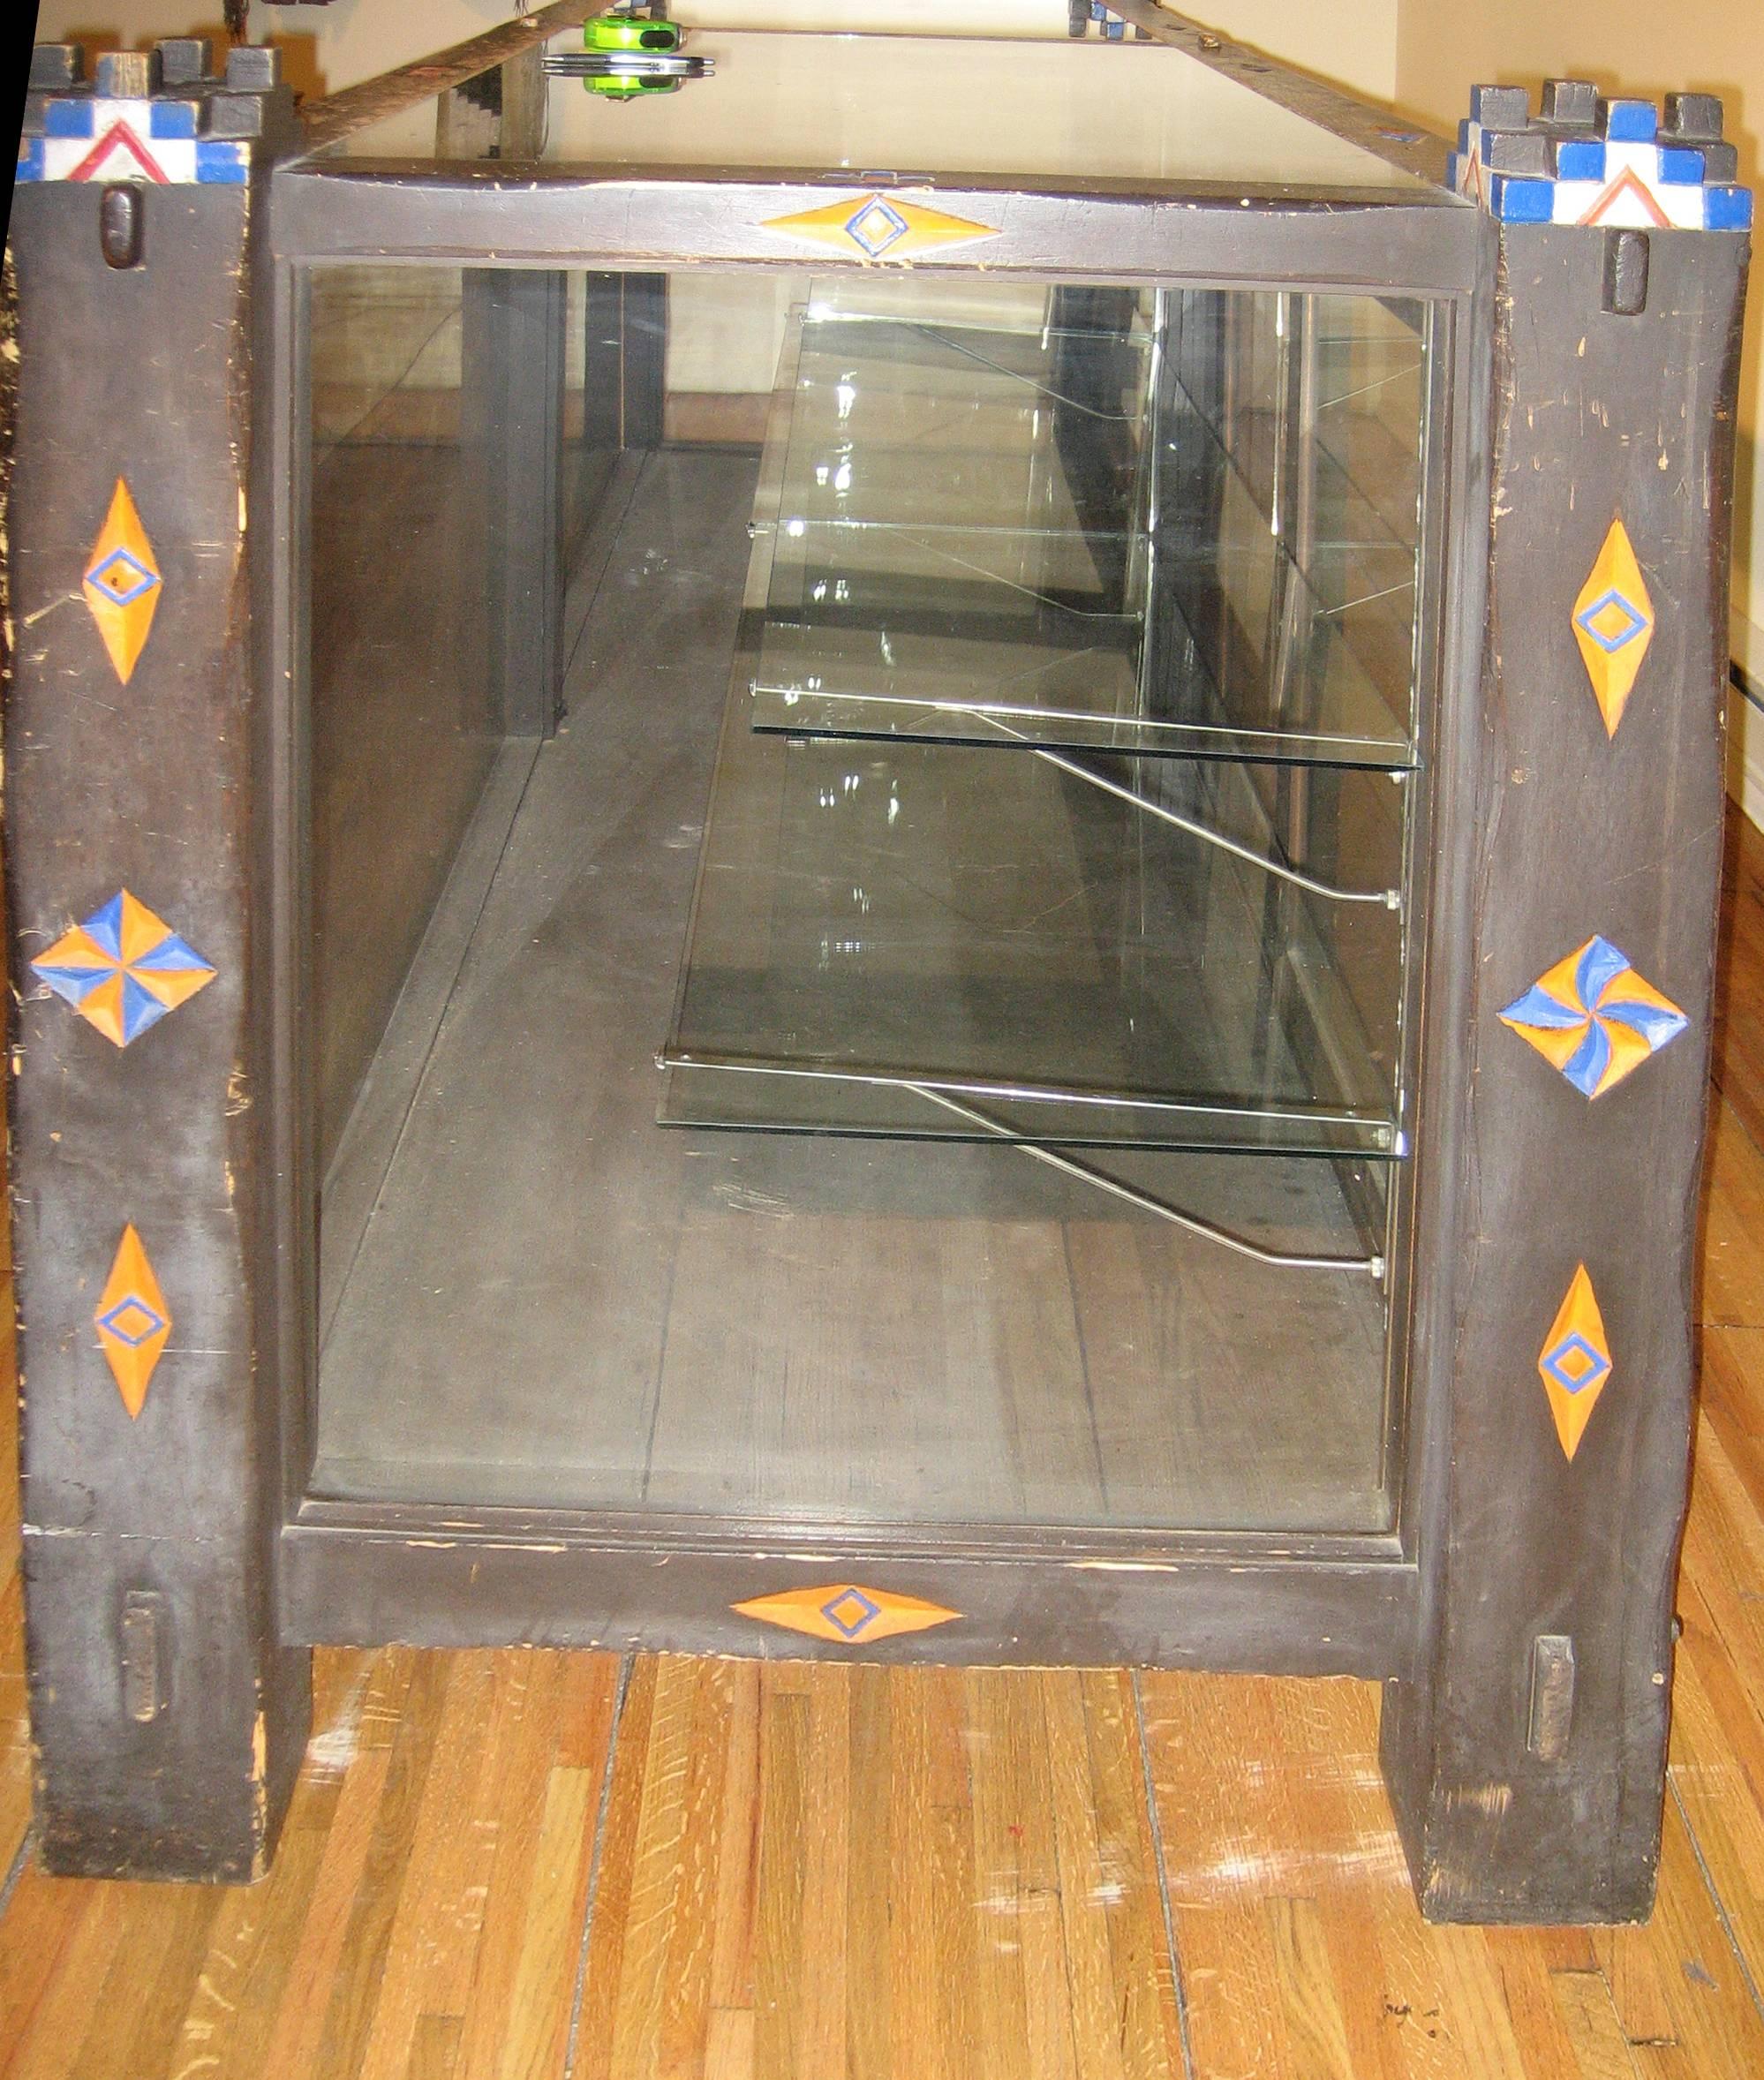 A charming hand-carved display case with Native American and New Mexican iconography including the Zuni sun symbol. Likely dating to the 1940s, this is believed to have been a display case in a New Mexican hotel, possibly the La Fonda in Santa Fe or